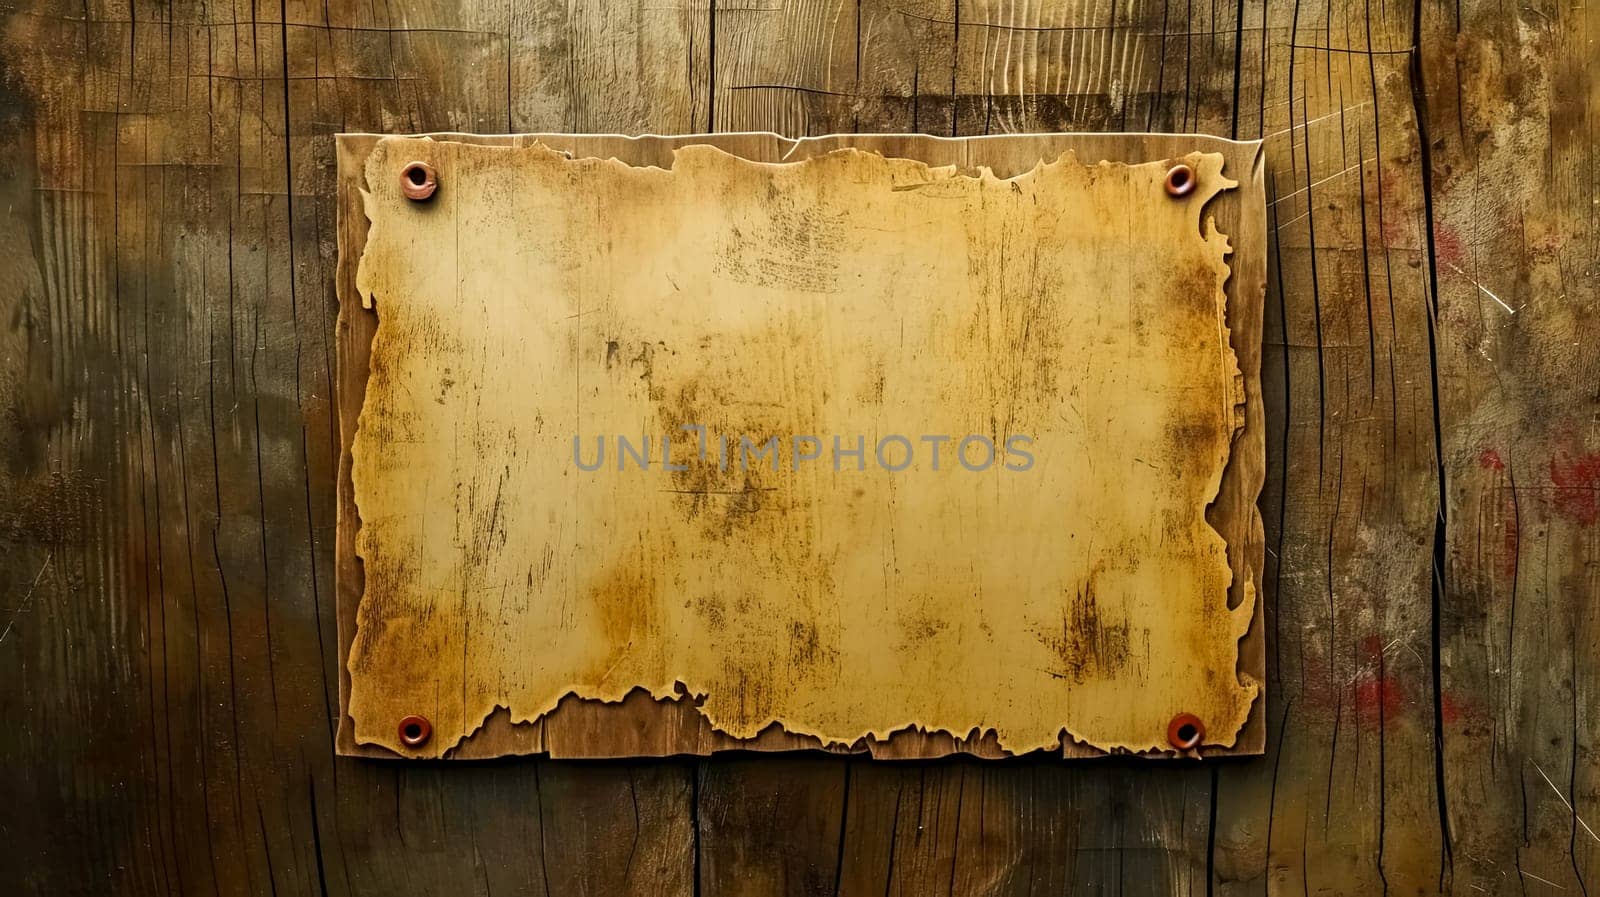 A worn and aged paper pinned onto a rugged wooden background, suggesting a vintage or rustic theme, ideal for storytelling, themed events, or historical presentations.